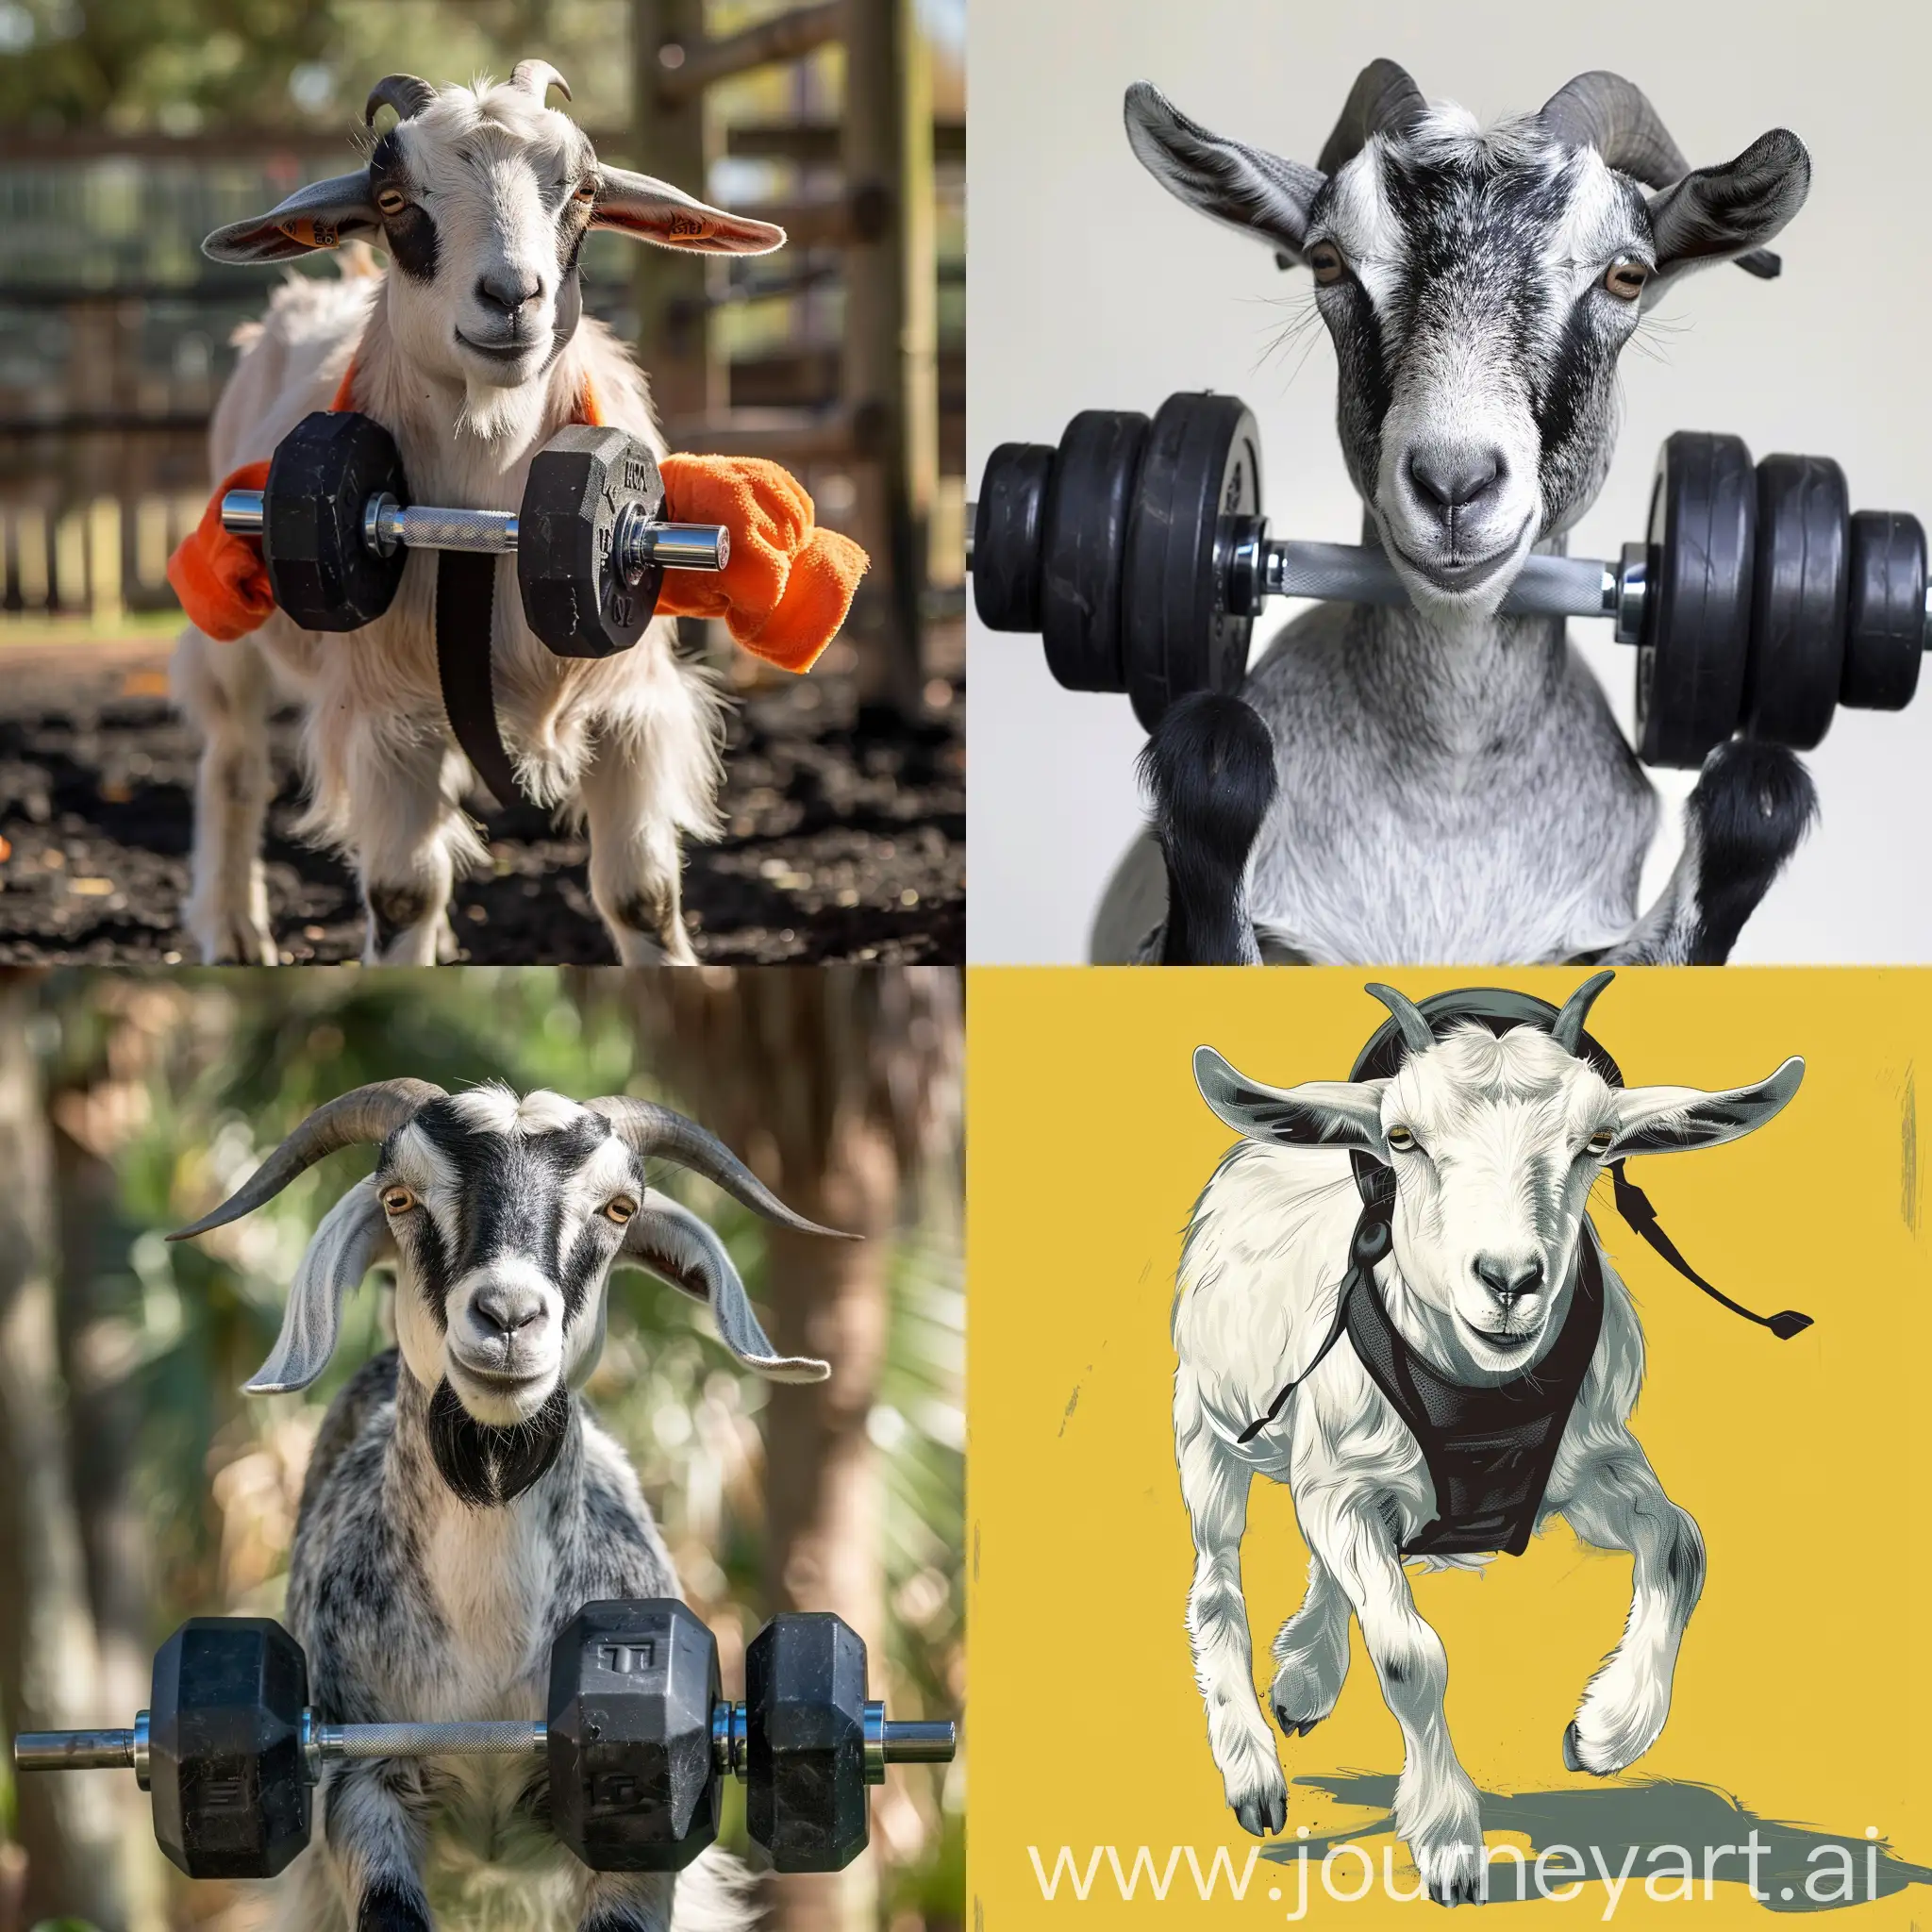 Goat-Fitness-Trainer-Guiding-Workout-Session